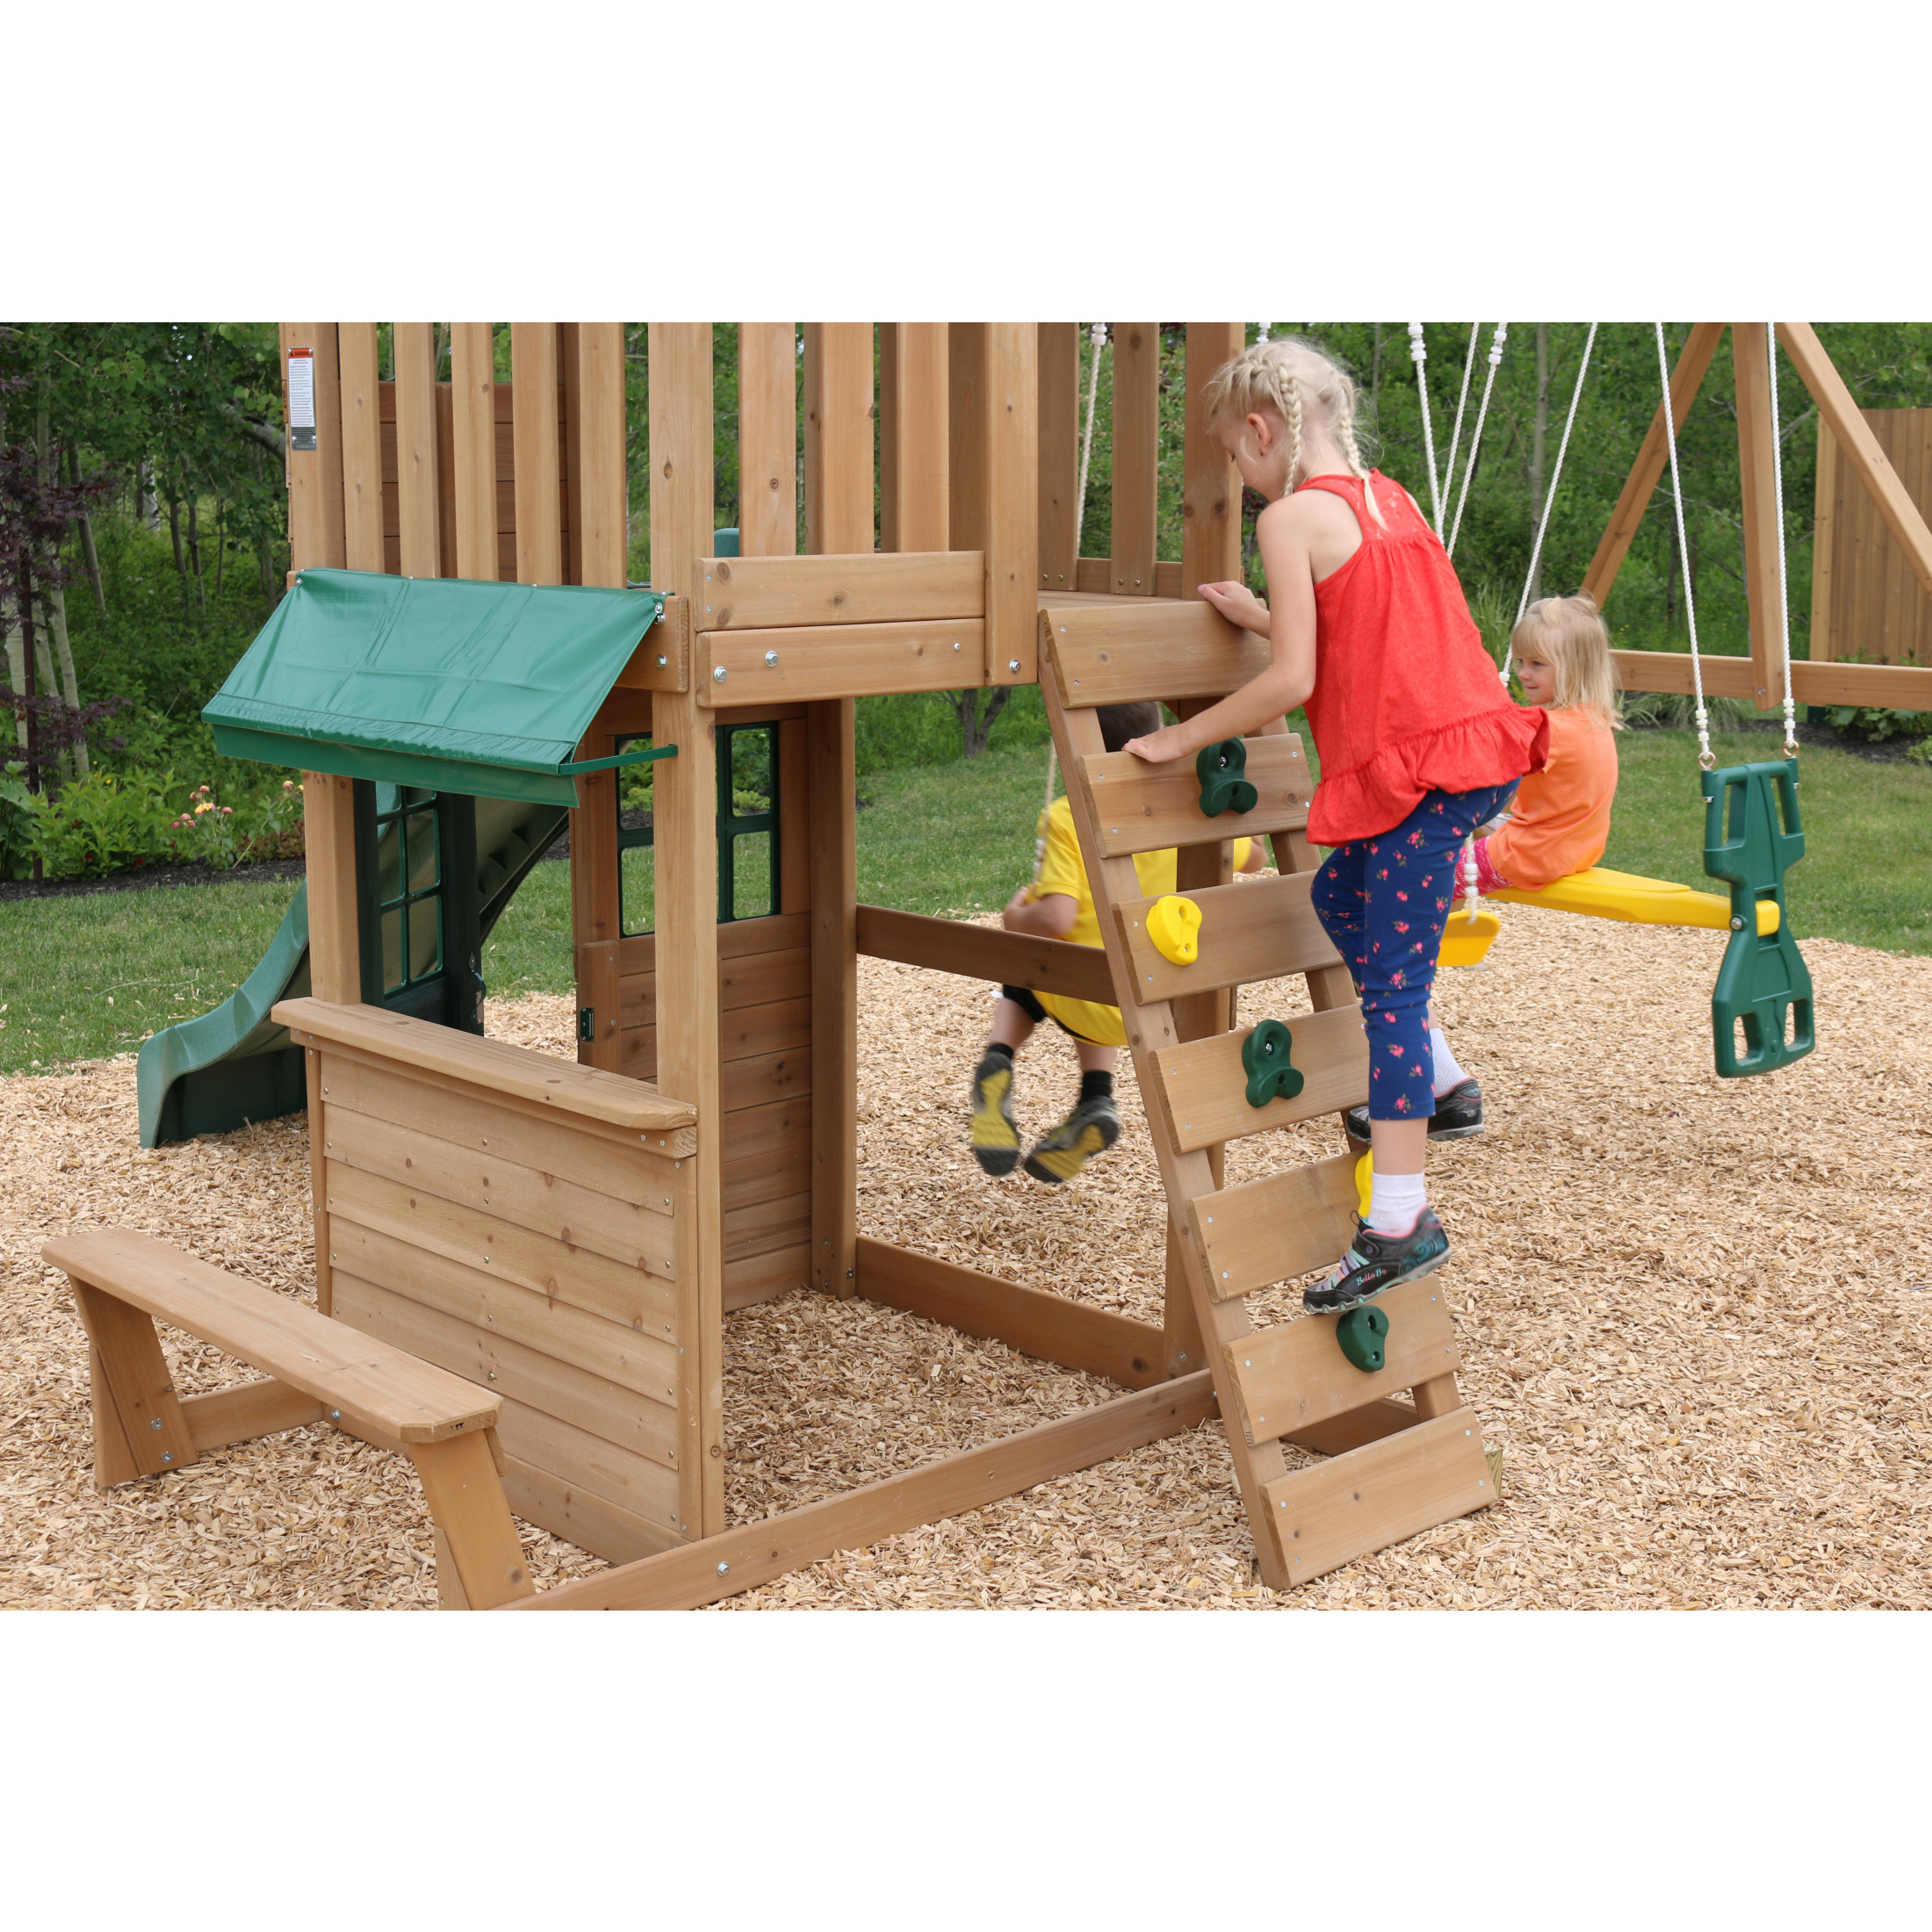 KidKraft Windale Wooden Swing Set / Playset with Clubhouse, Swings, Slide, Shaded Table and Bench - image 9 of 12